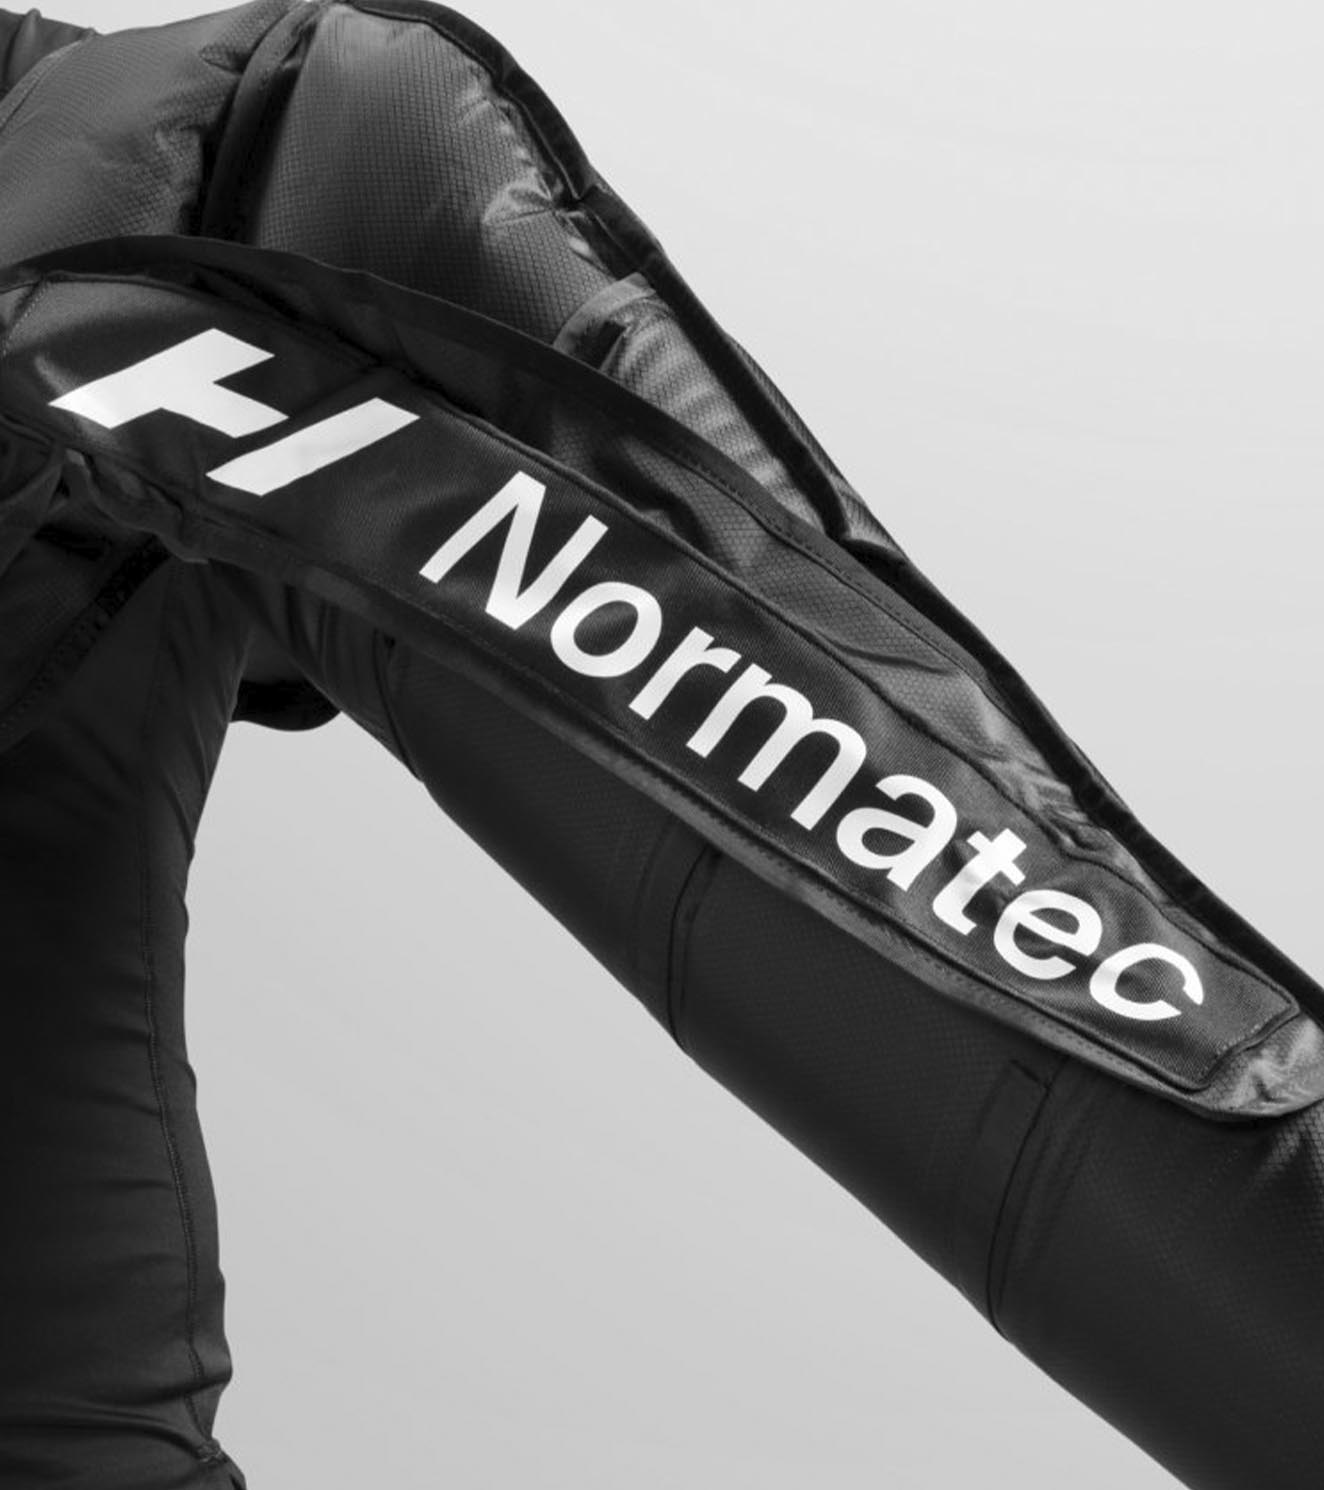 Normatec 3 Full Body - Recovery gear